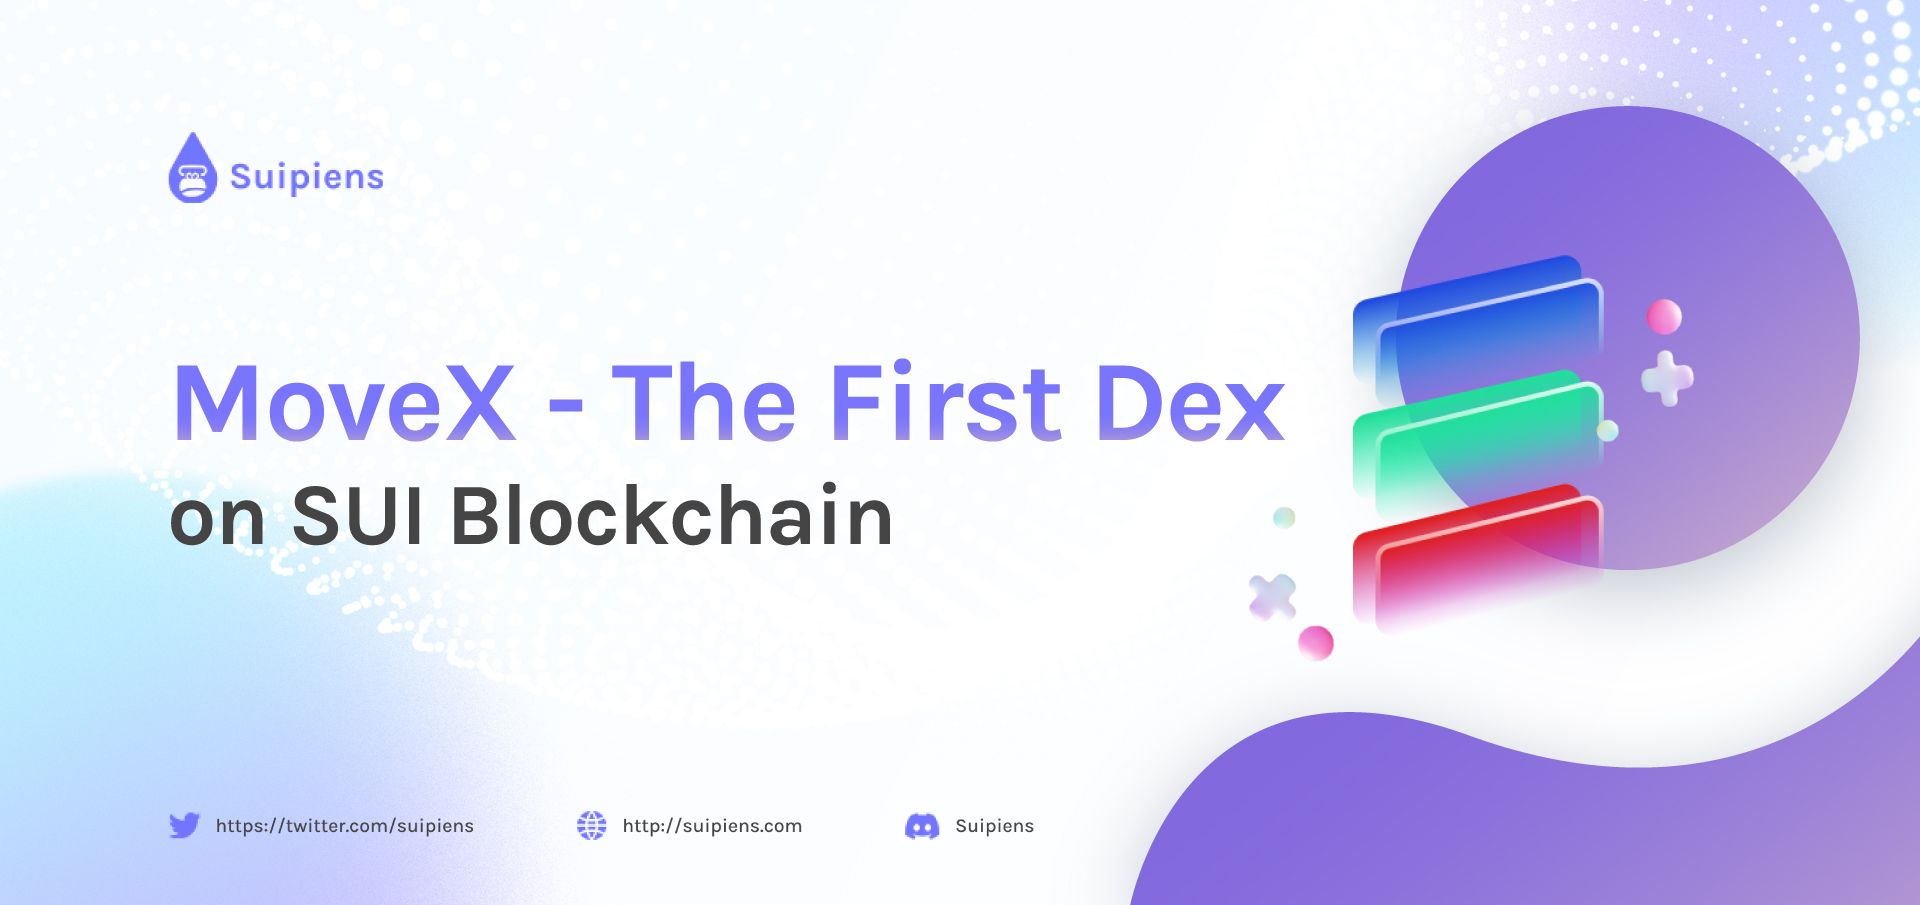 Movex – The First Dex on SUI Blockchain